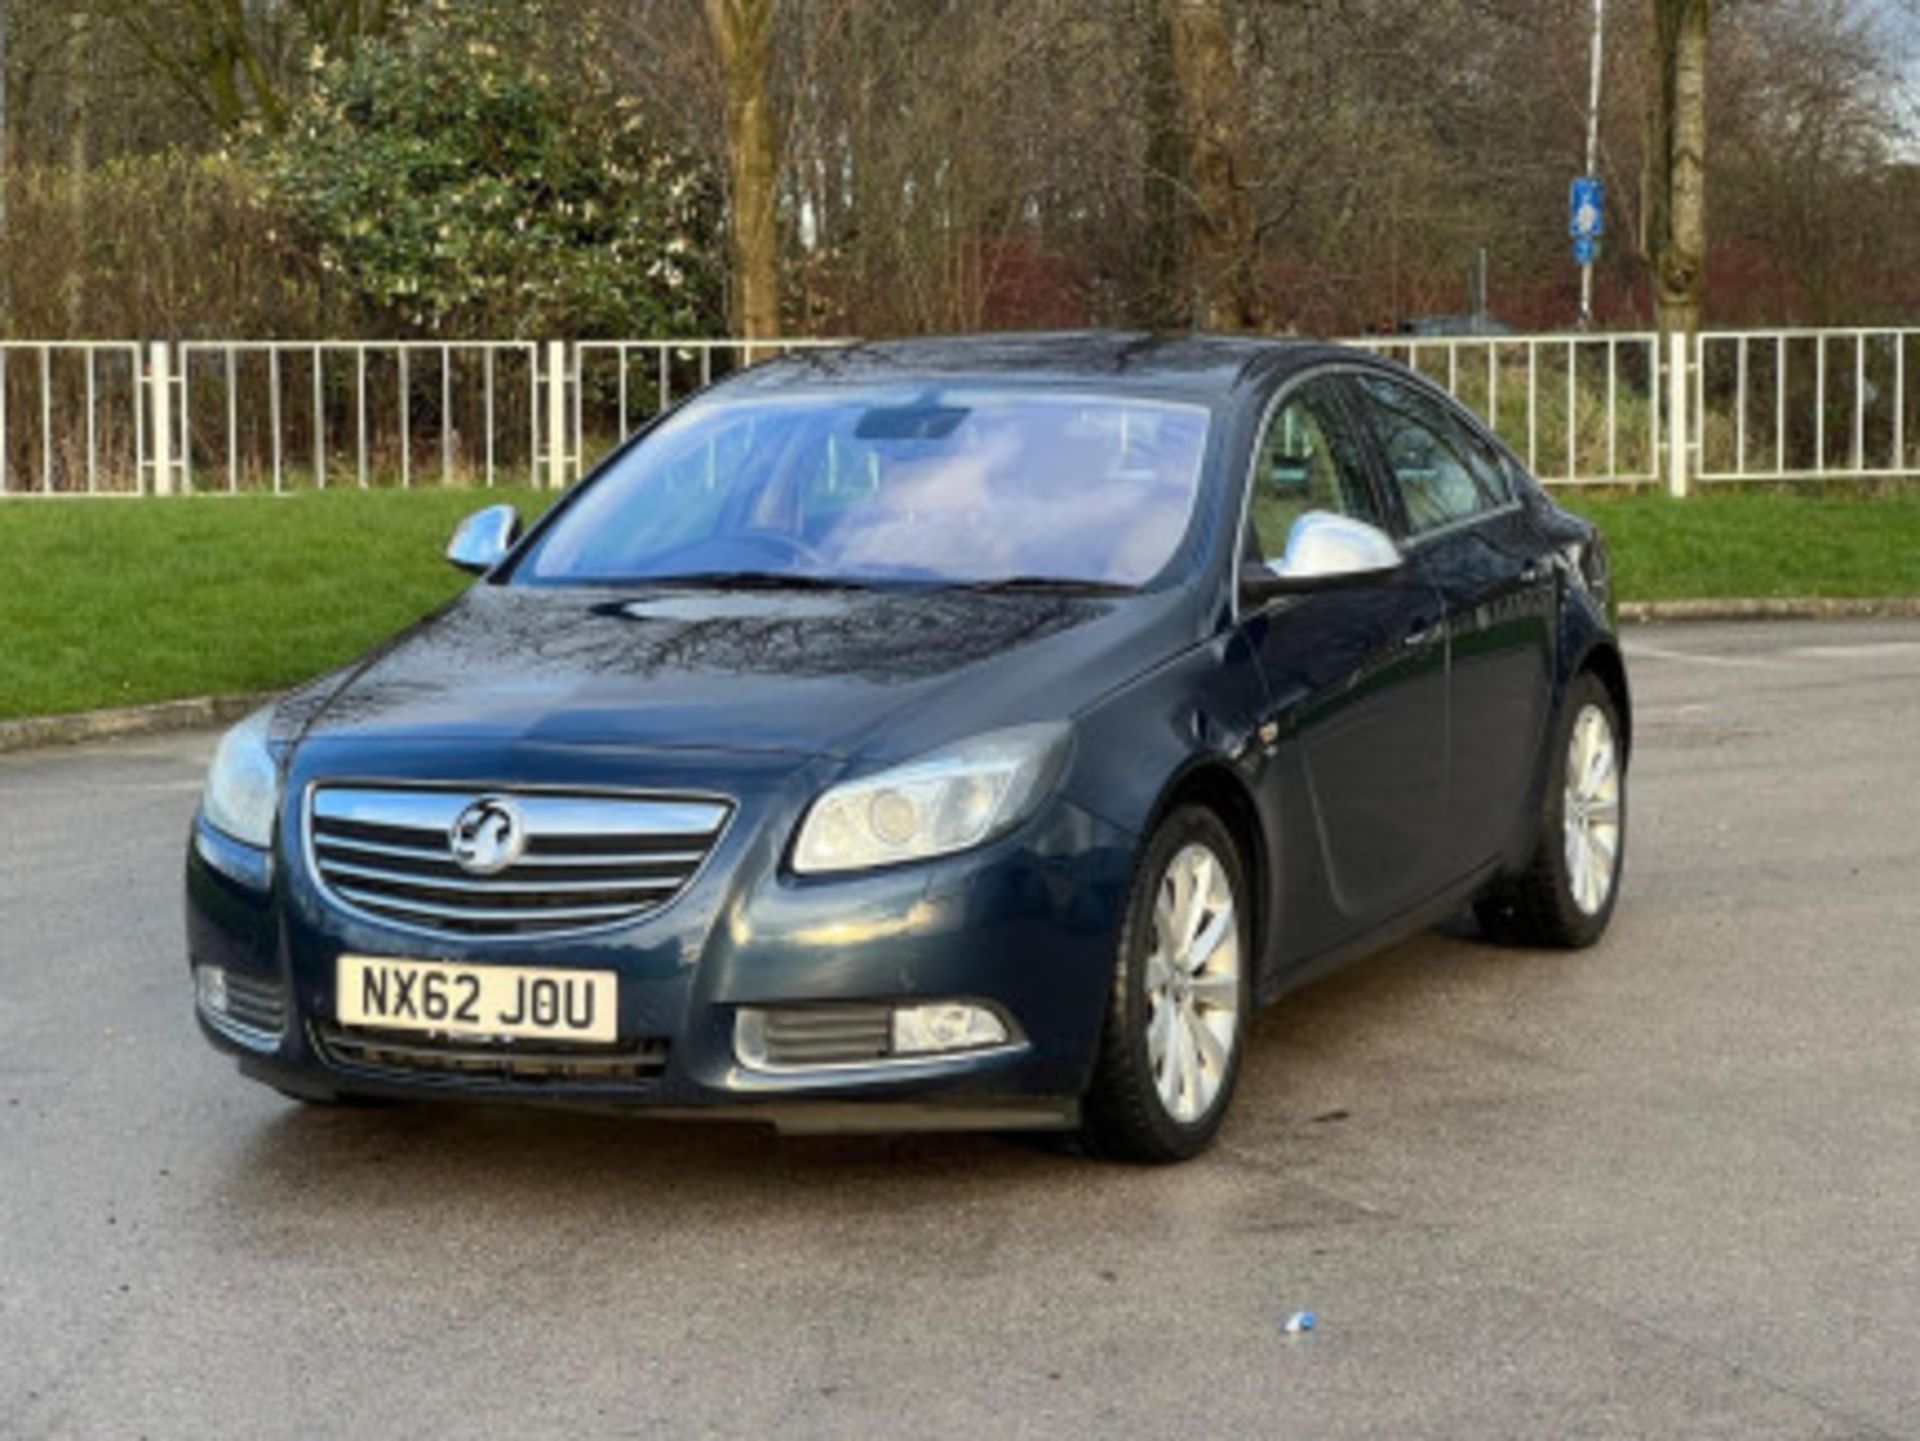 2012 VAUXHALL INSIGNIA 2.0 CDTI ELITE AUTO EURO 5 - DISCOVER EXCELLENCE >>--NO VAT ON HAMMER--<< - Image 46 of 120